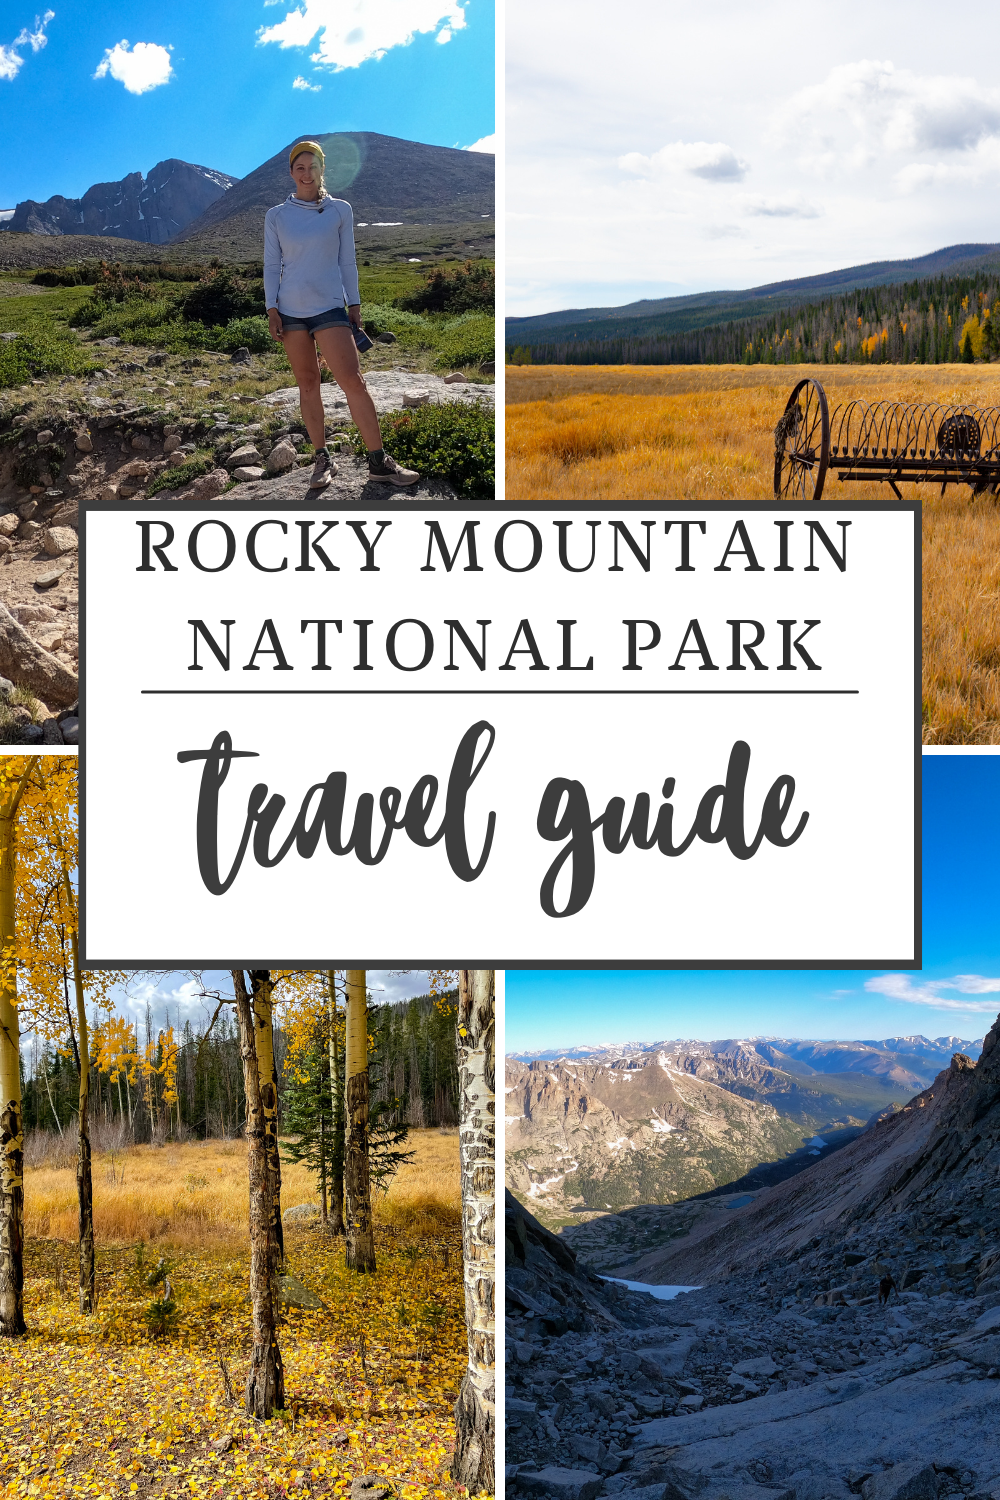 10 Things to fo at rocky mountain national park in Colorado #colorado #nationalparks